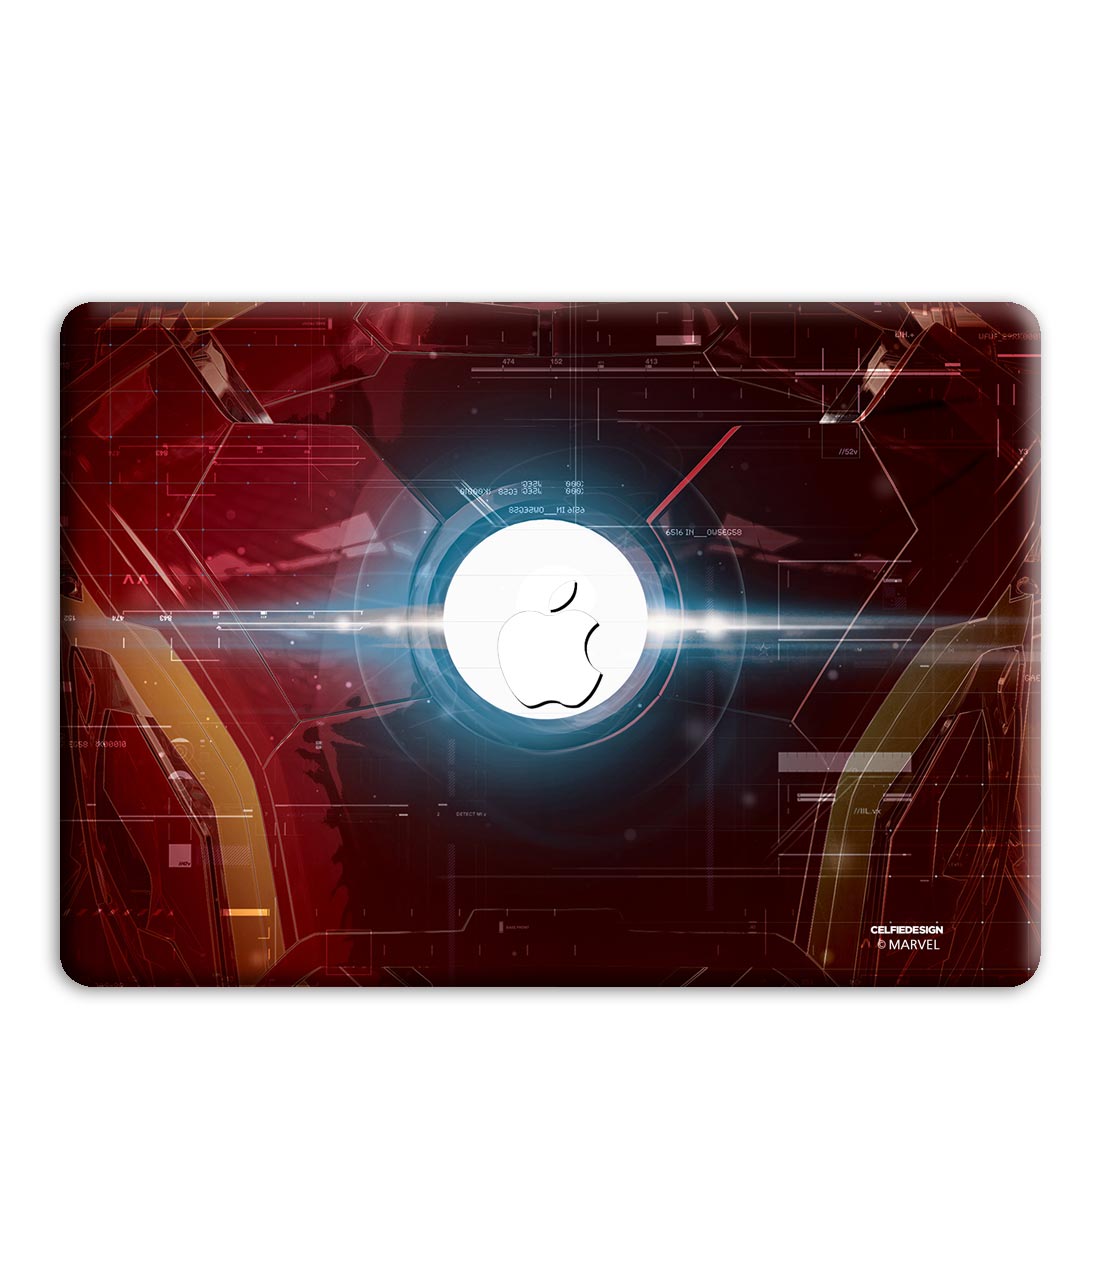 Suit of Armour - Skins for Macbook Air 13" (2012-2017)